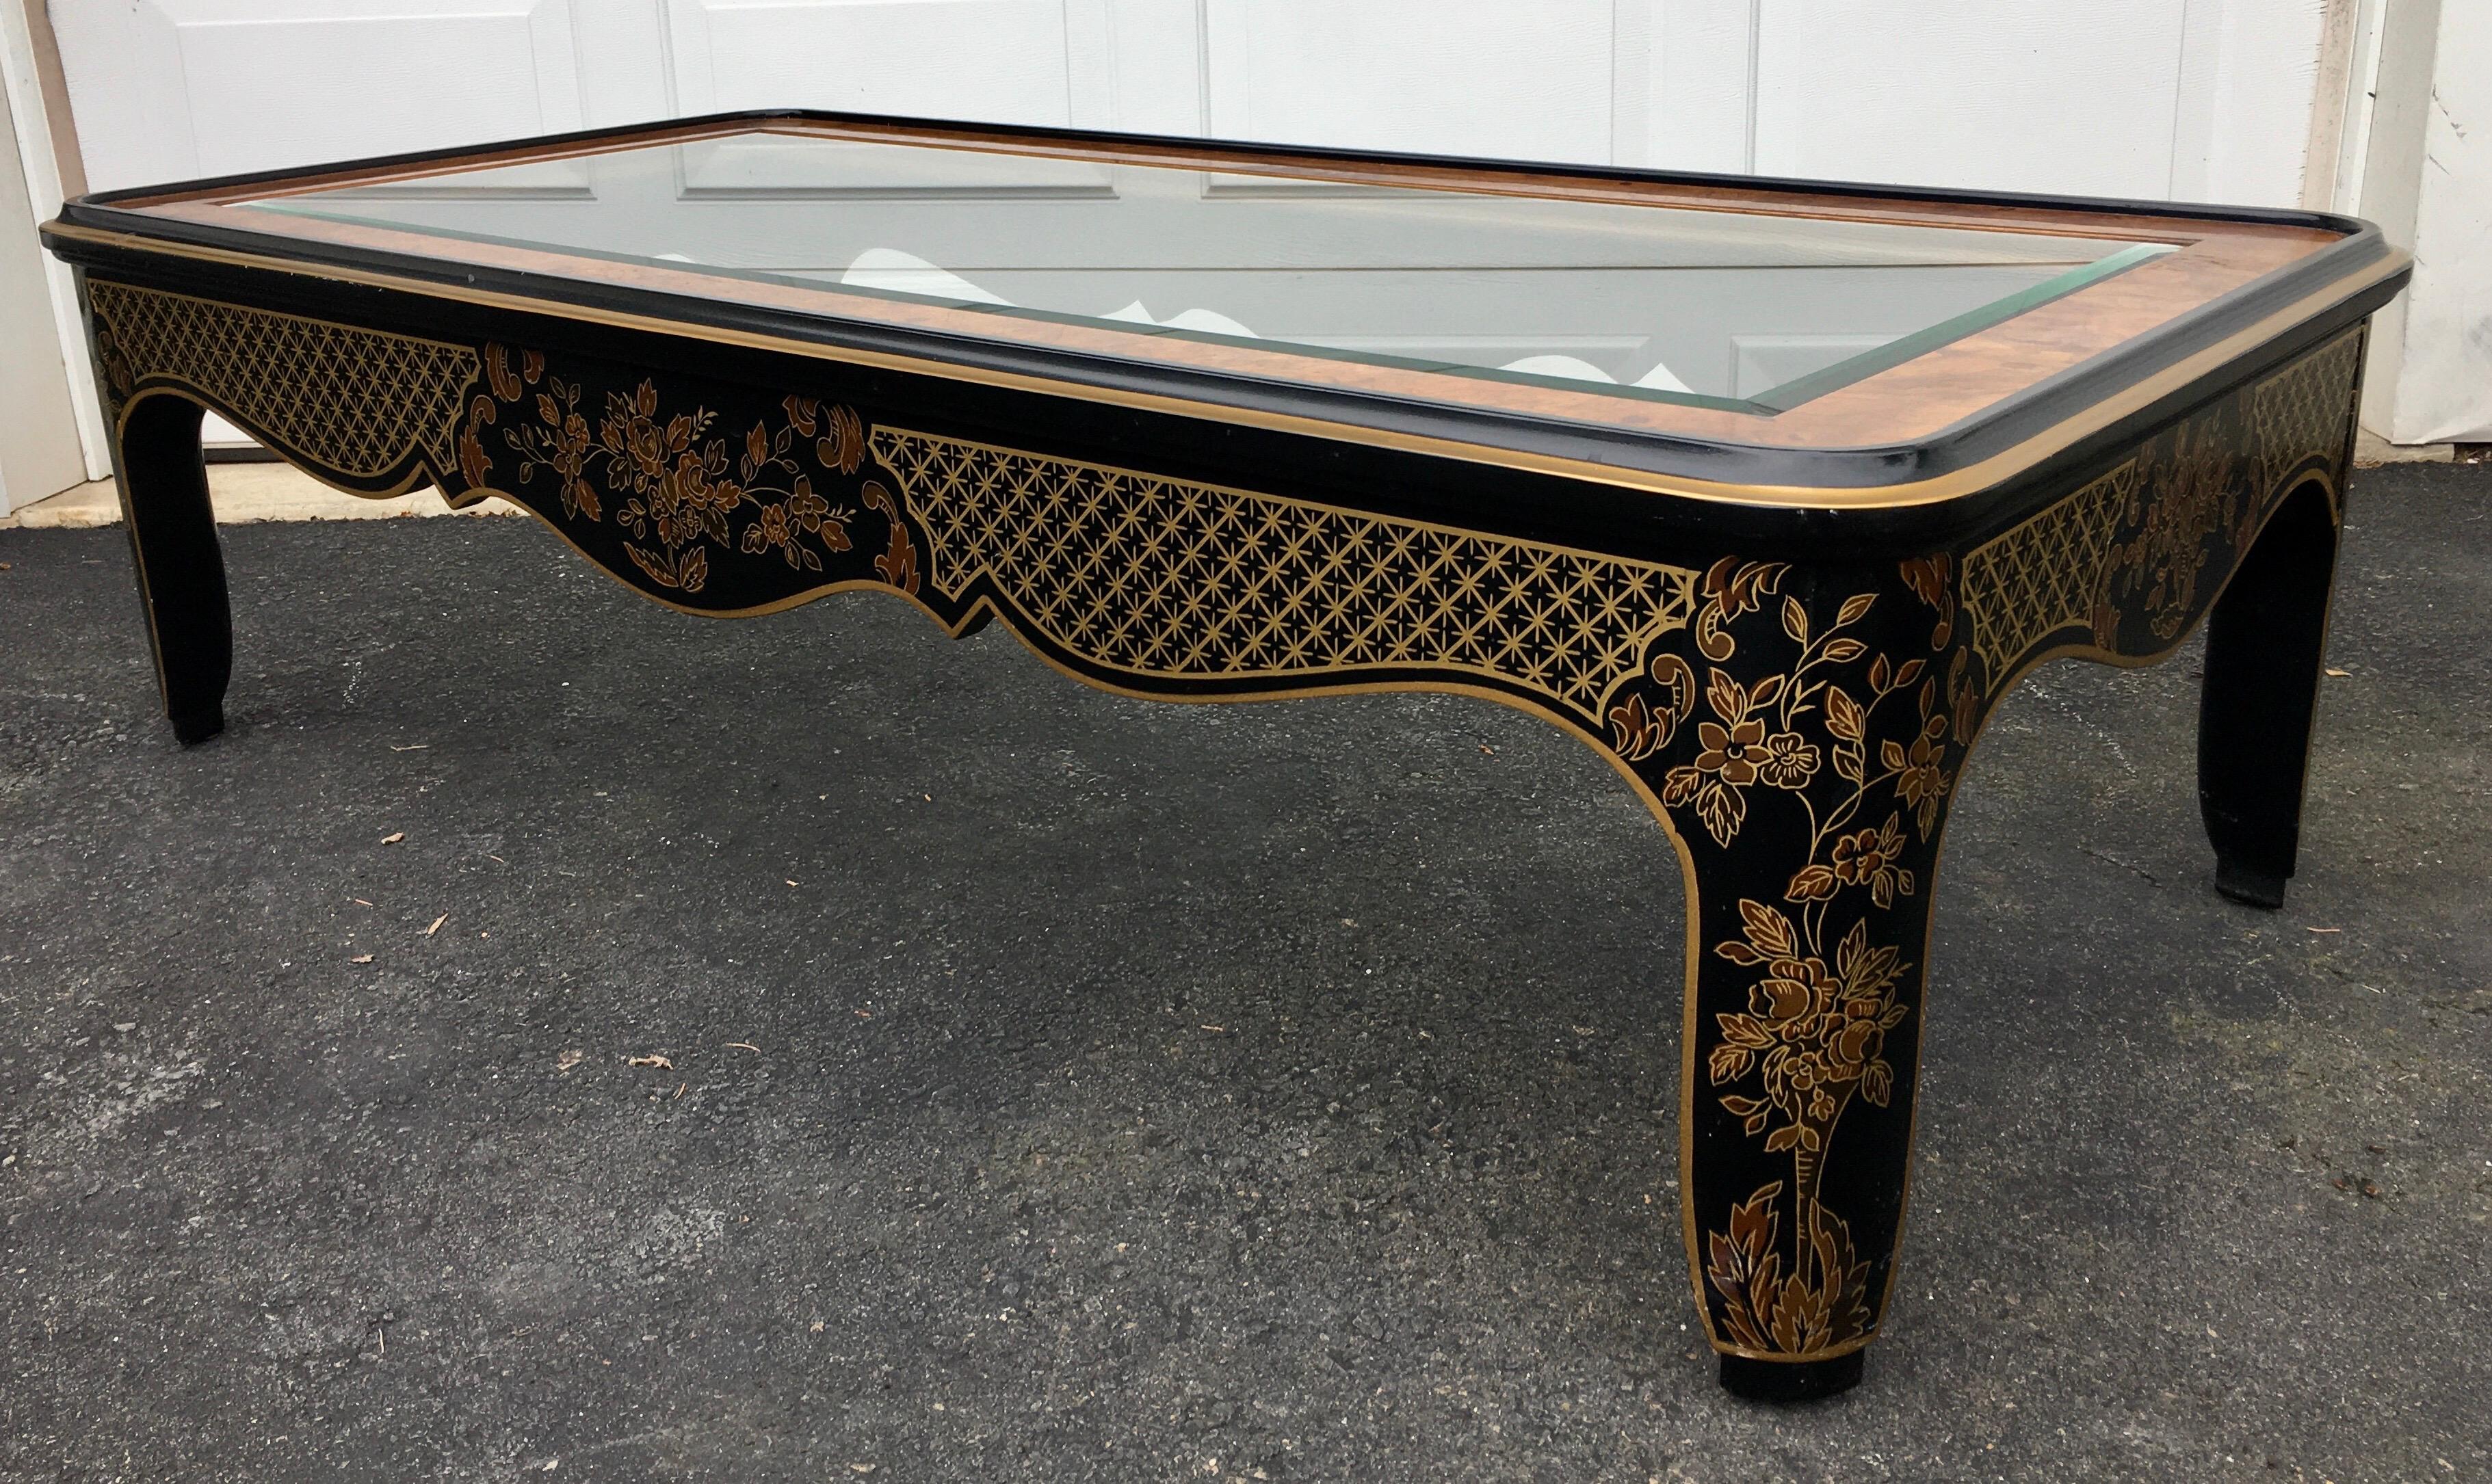 Rectangular Hollywood Regency burl wood and glass coffee table by Drexel Furniture. This sculptural cocktail table features original gloss Black wood frame with hand painted gold leaf detailing of fretwork and floral design. Includes original and